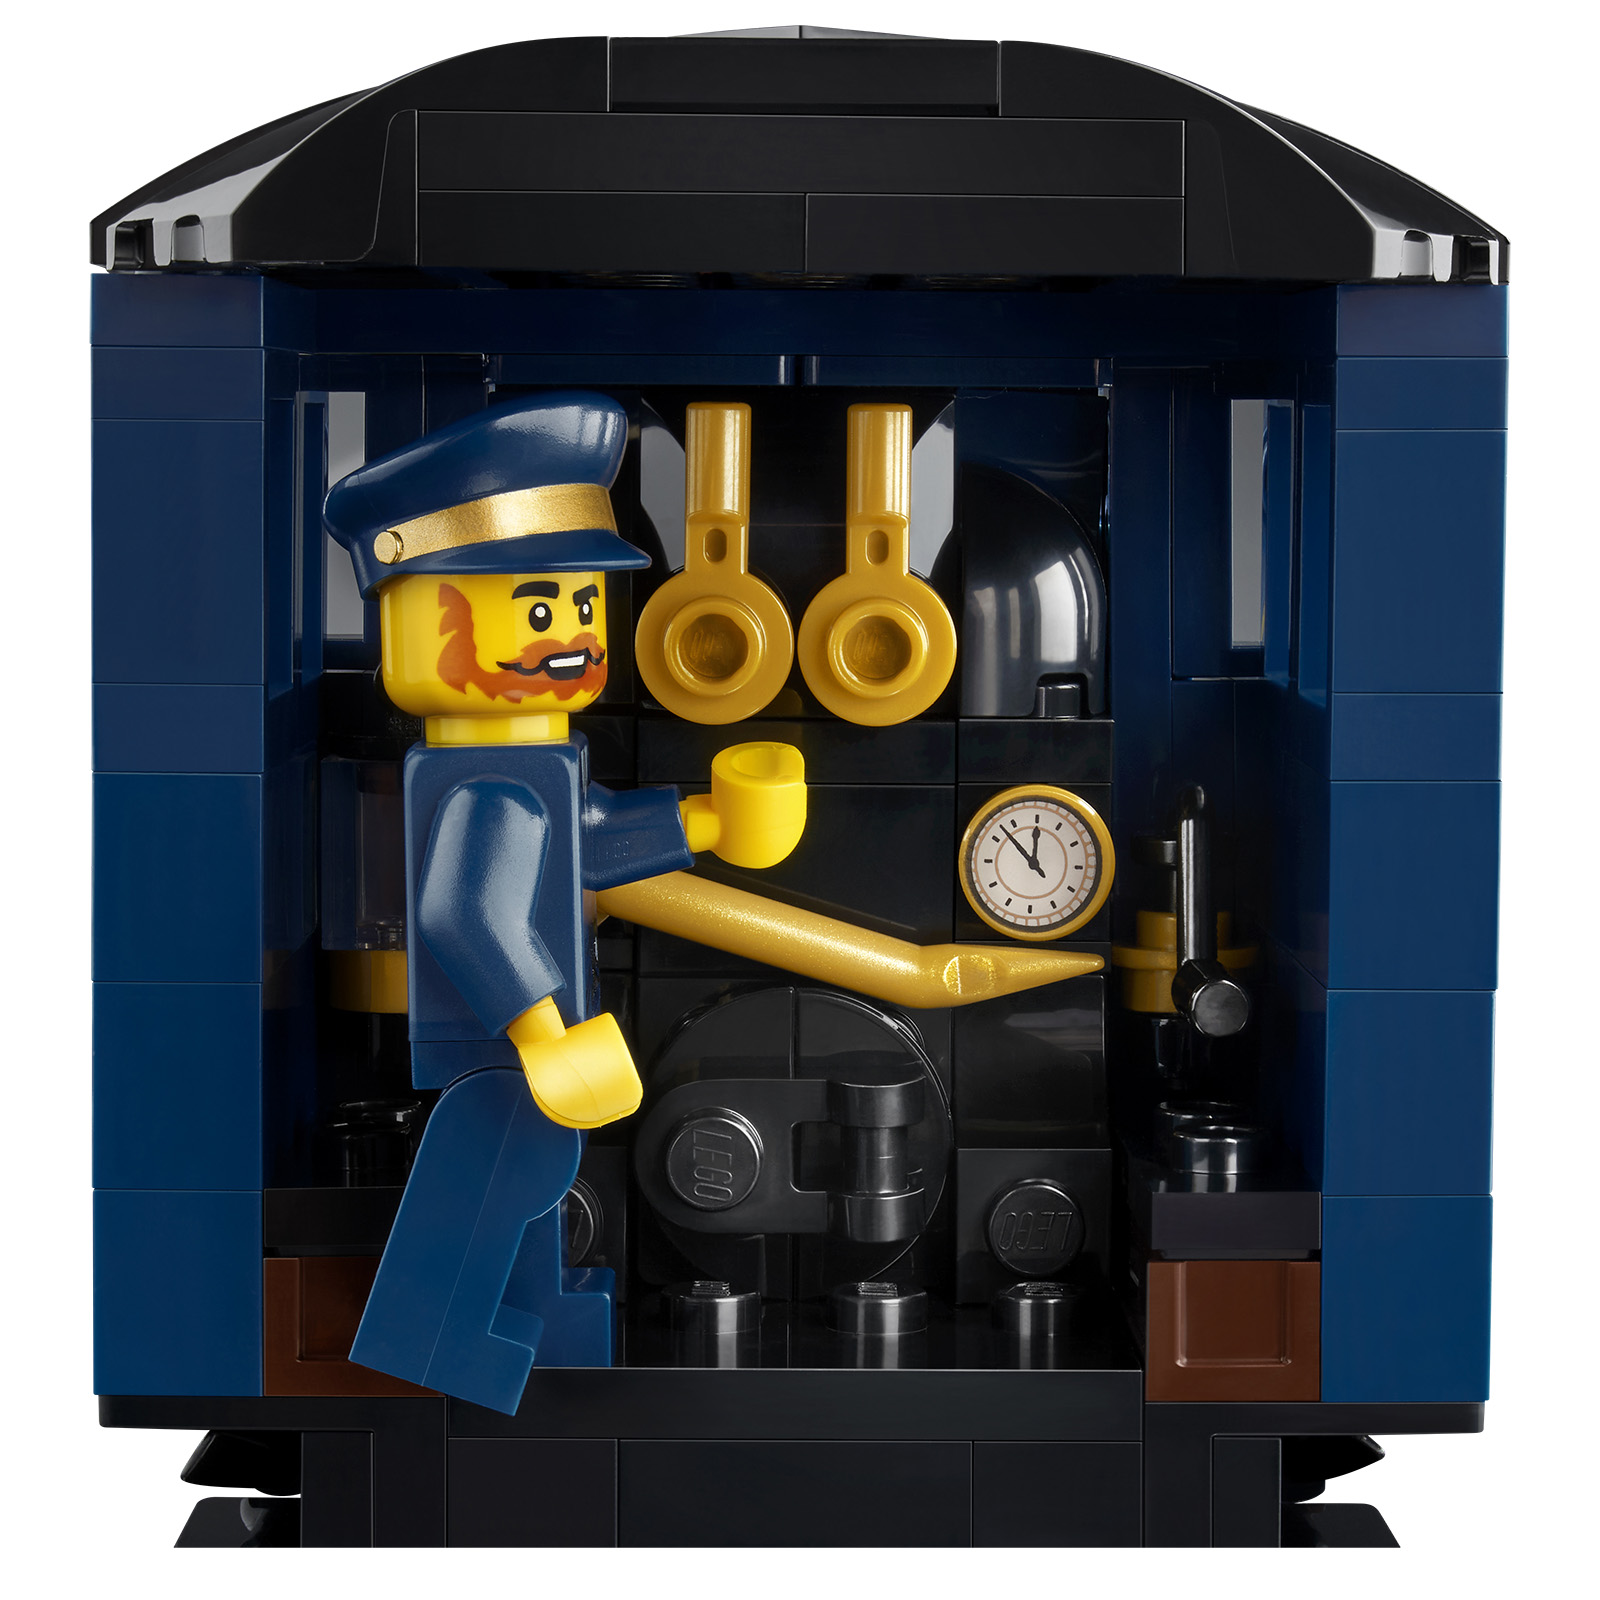 LEGO Ideas 21344 Orient Express detailed building review and comparison 